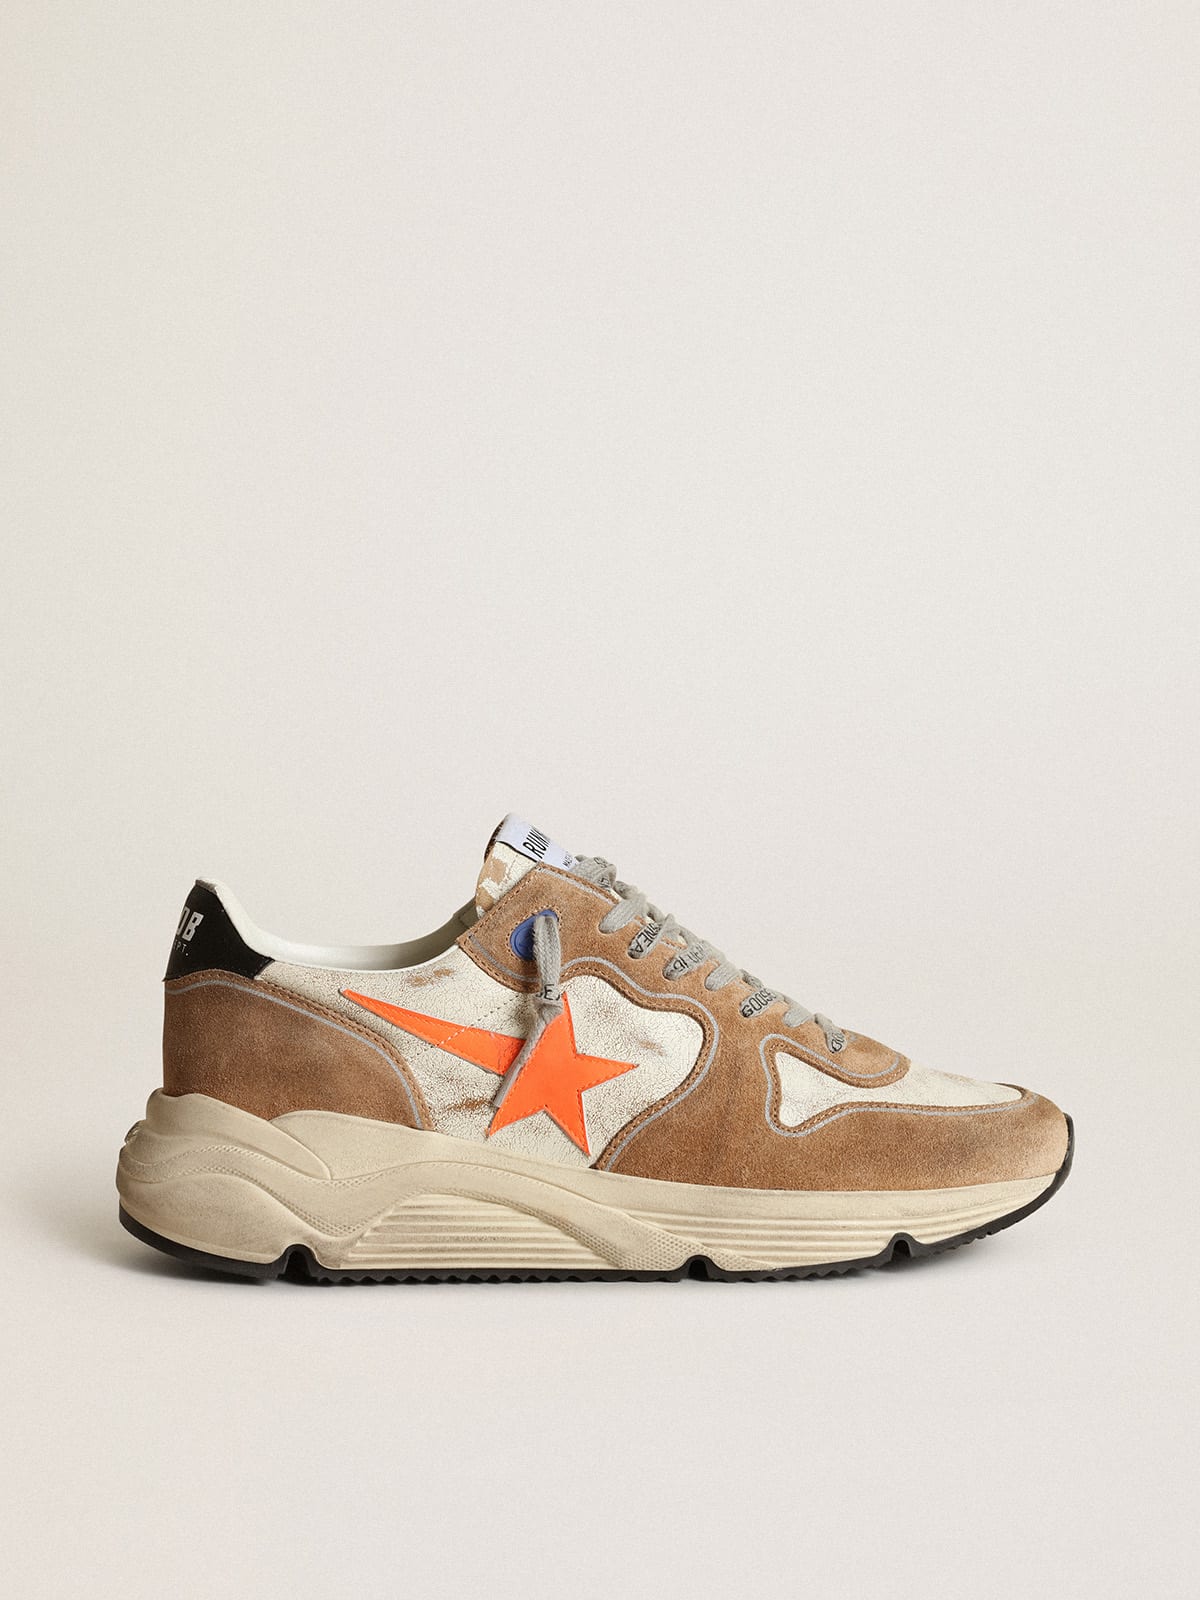 Running Sole LTD sneakers in glossy white leather and tobacco-colored suede with fluorescent orange leather star